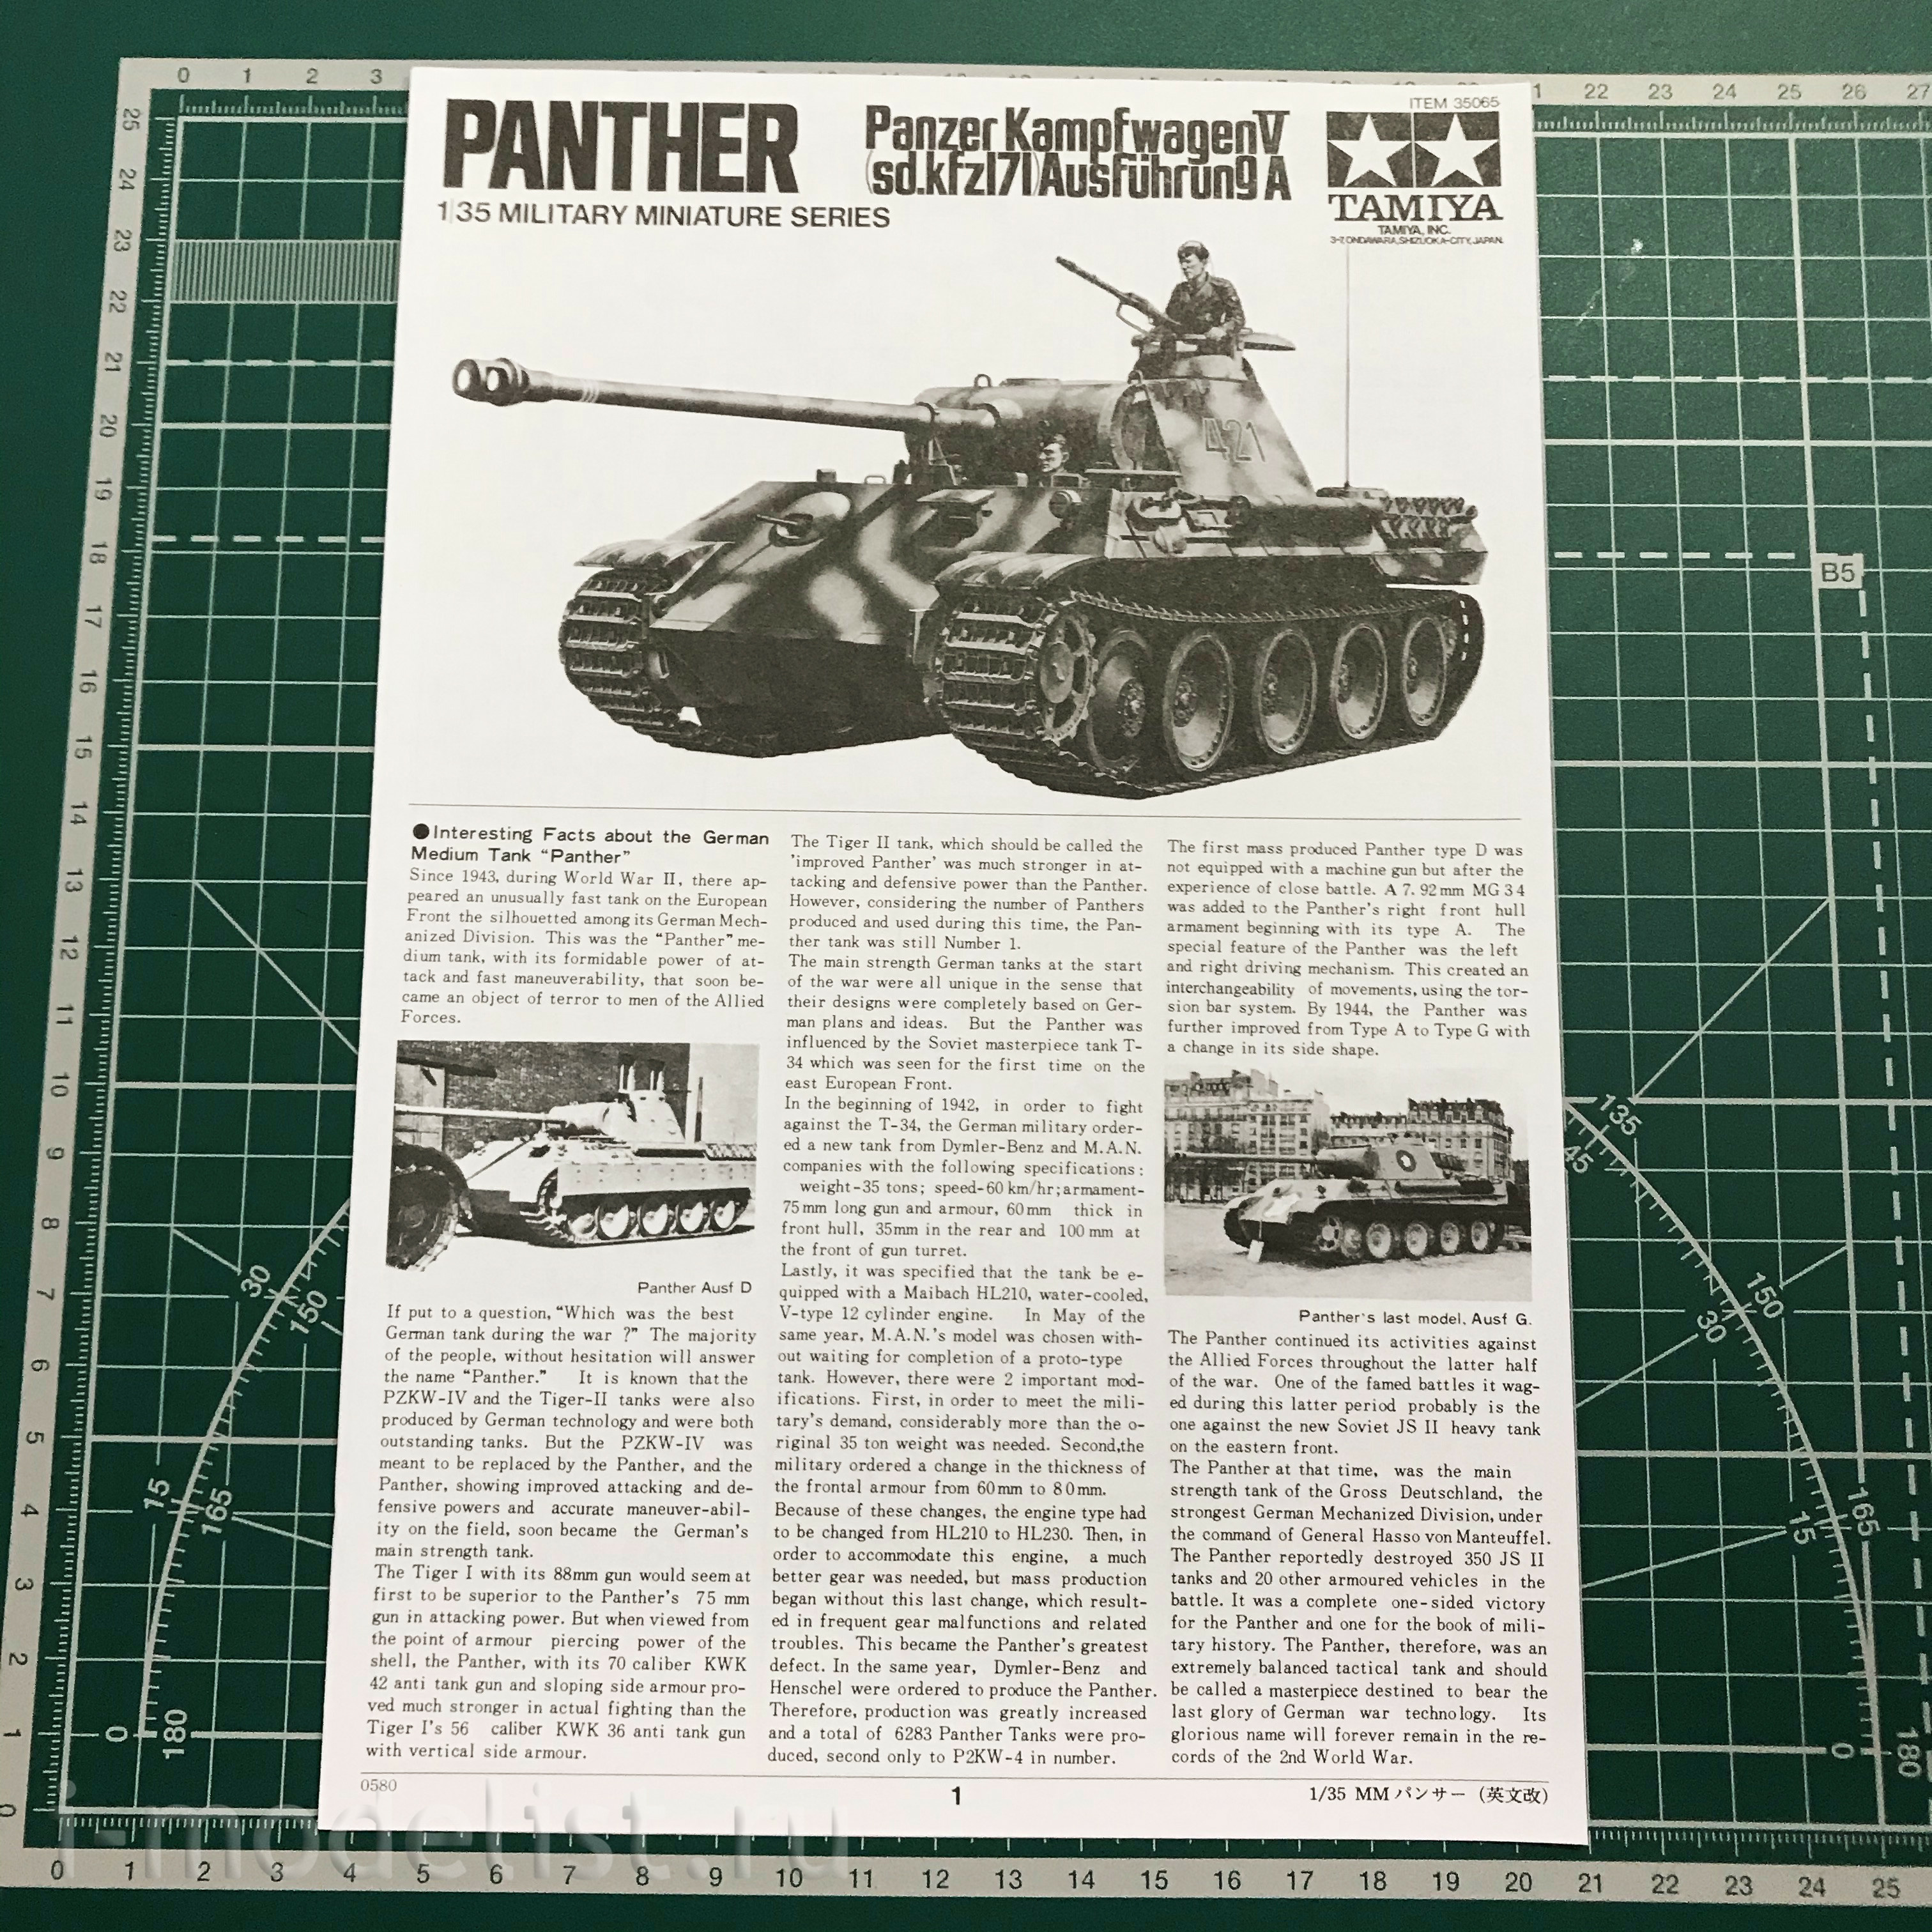 35065 Tamiya 1/35 German medium tank Panther (Sd.kfz.171) Ausf.And with a 75mm gun and a bullet.KWK42 (2 figures tankers)